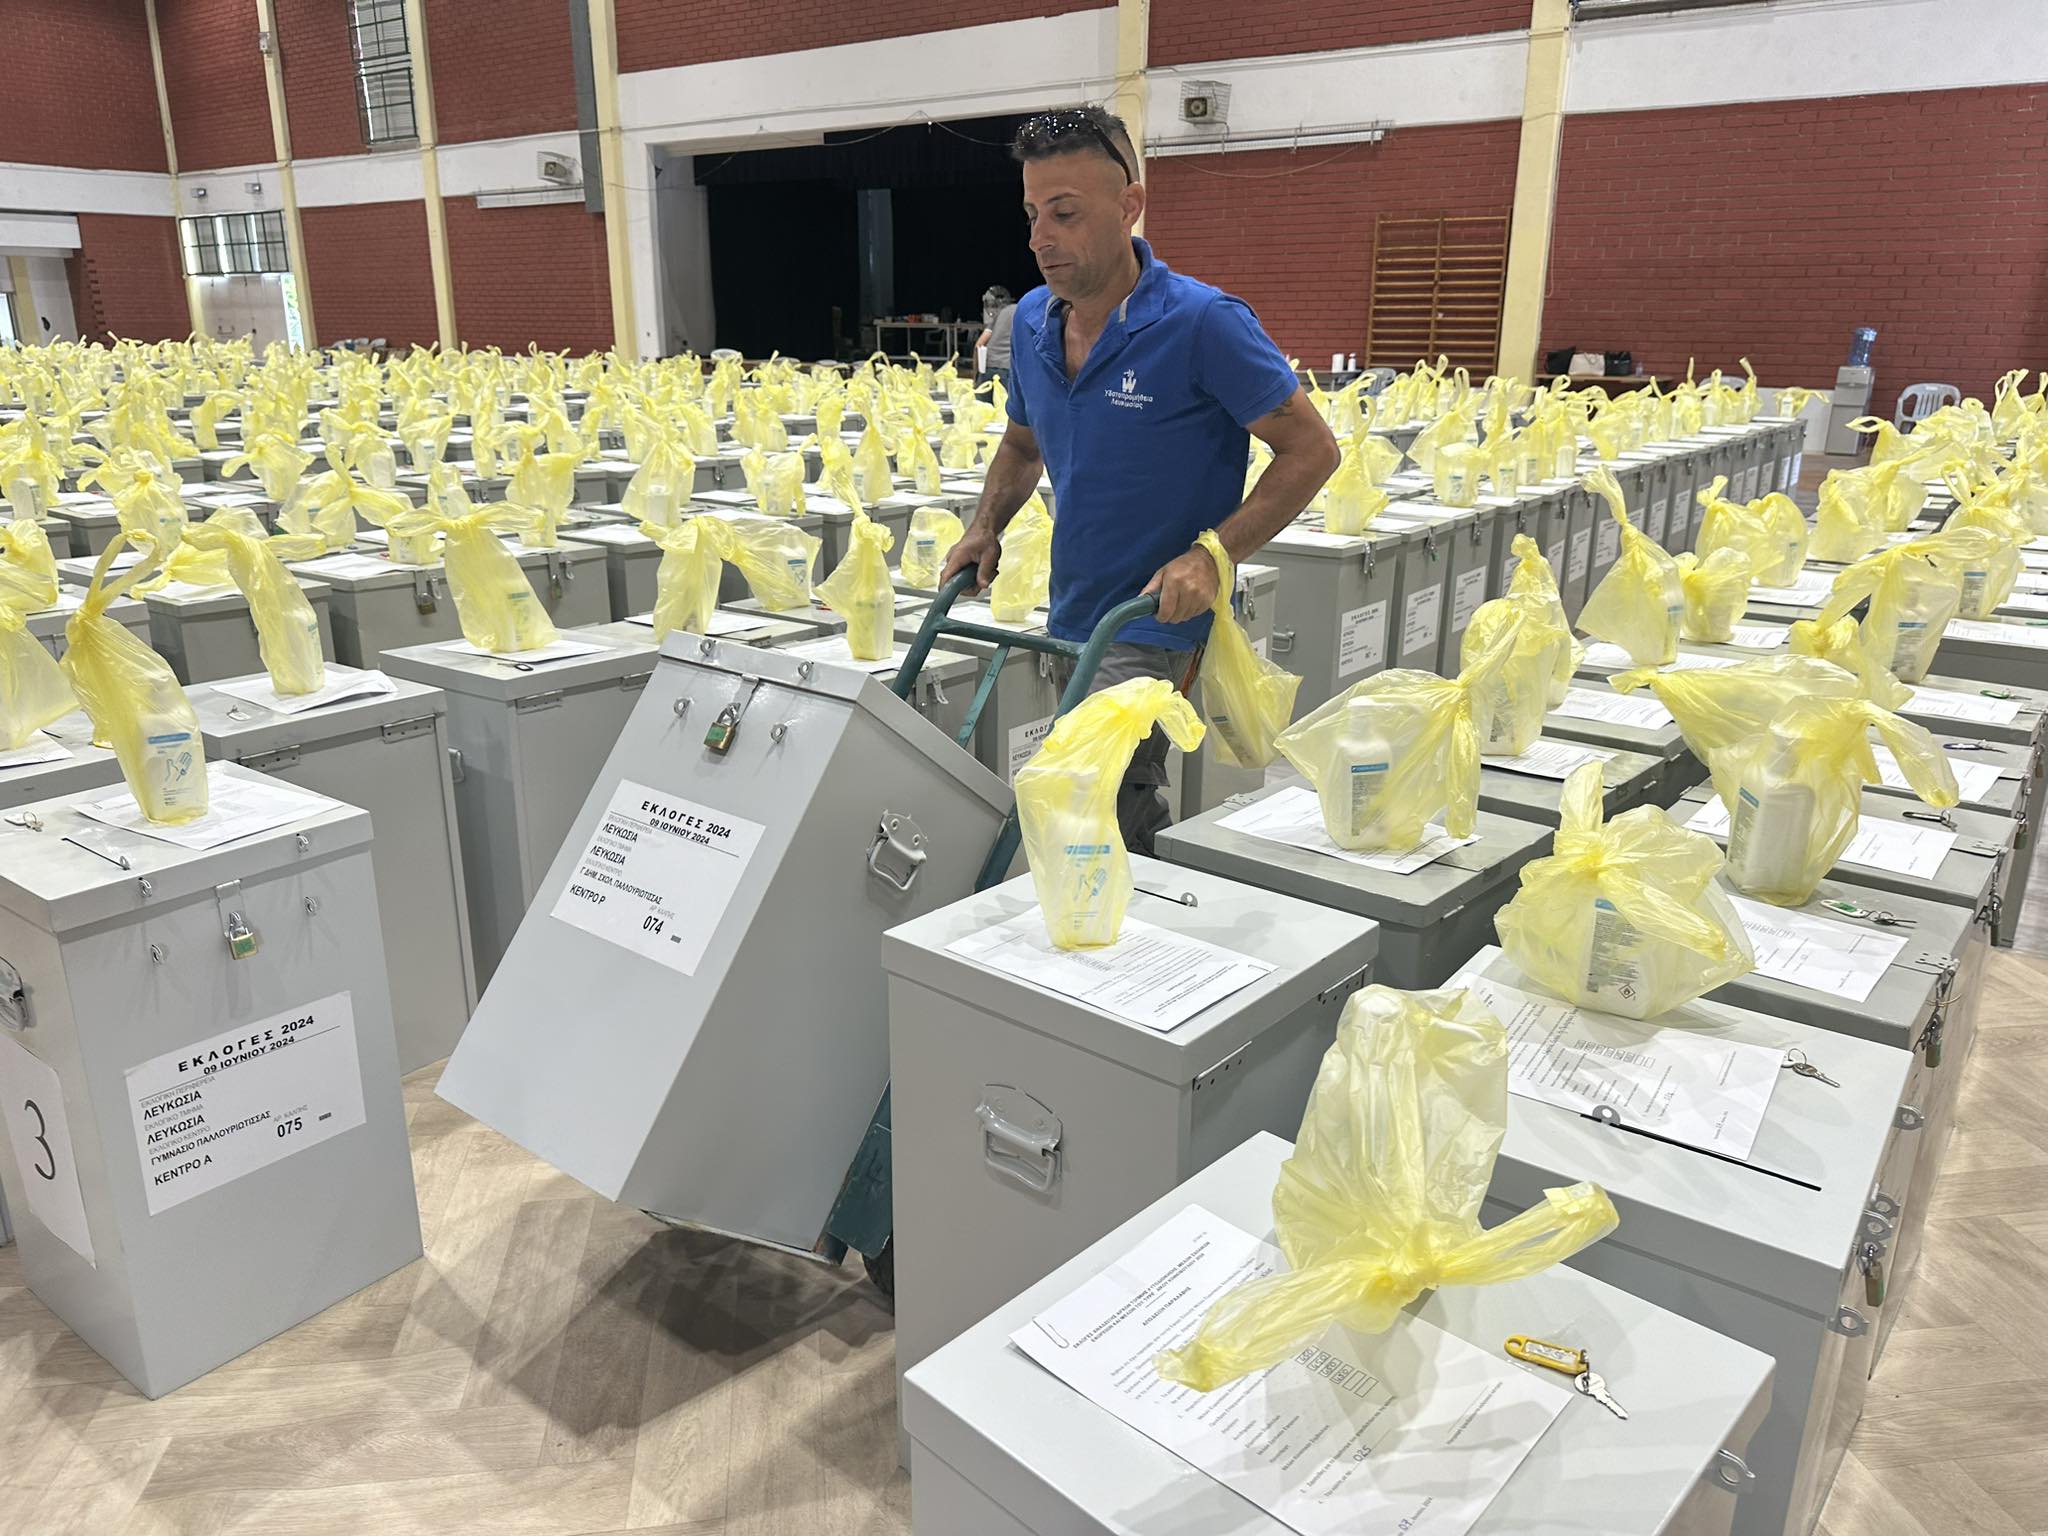 image Ballot boxes ready for Sunday election